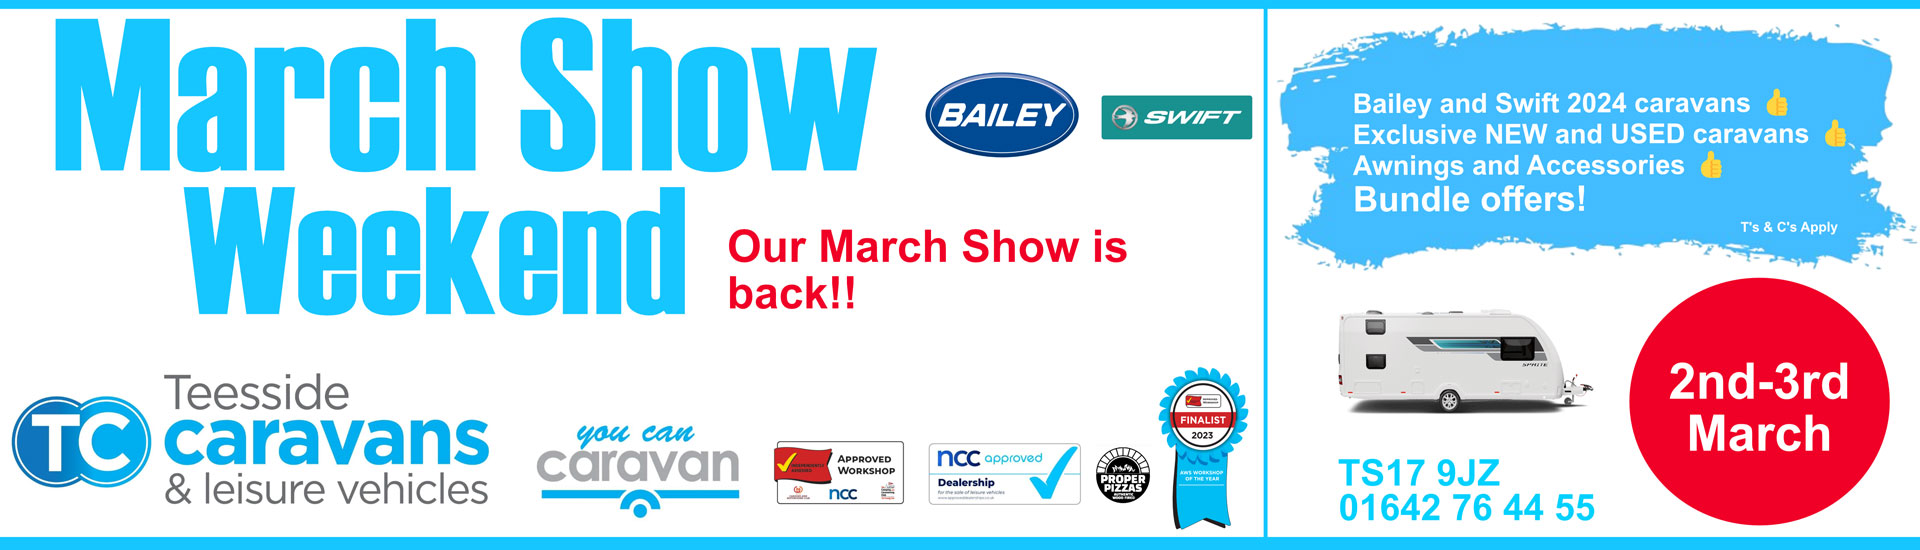 March show weekend 2024